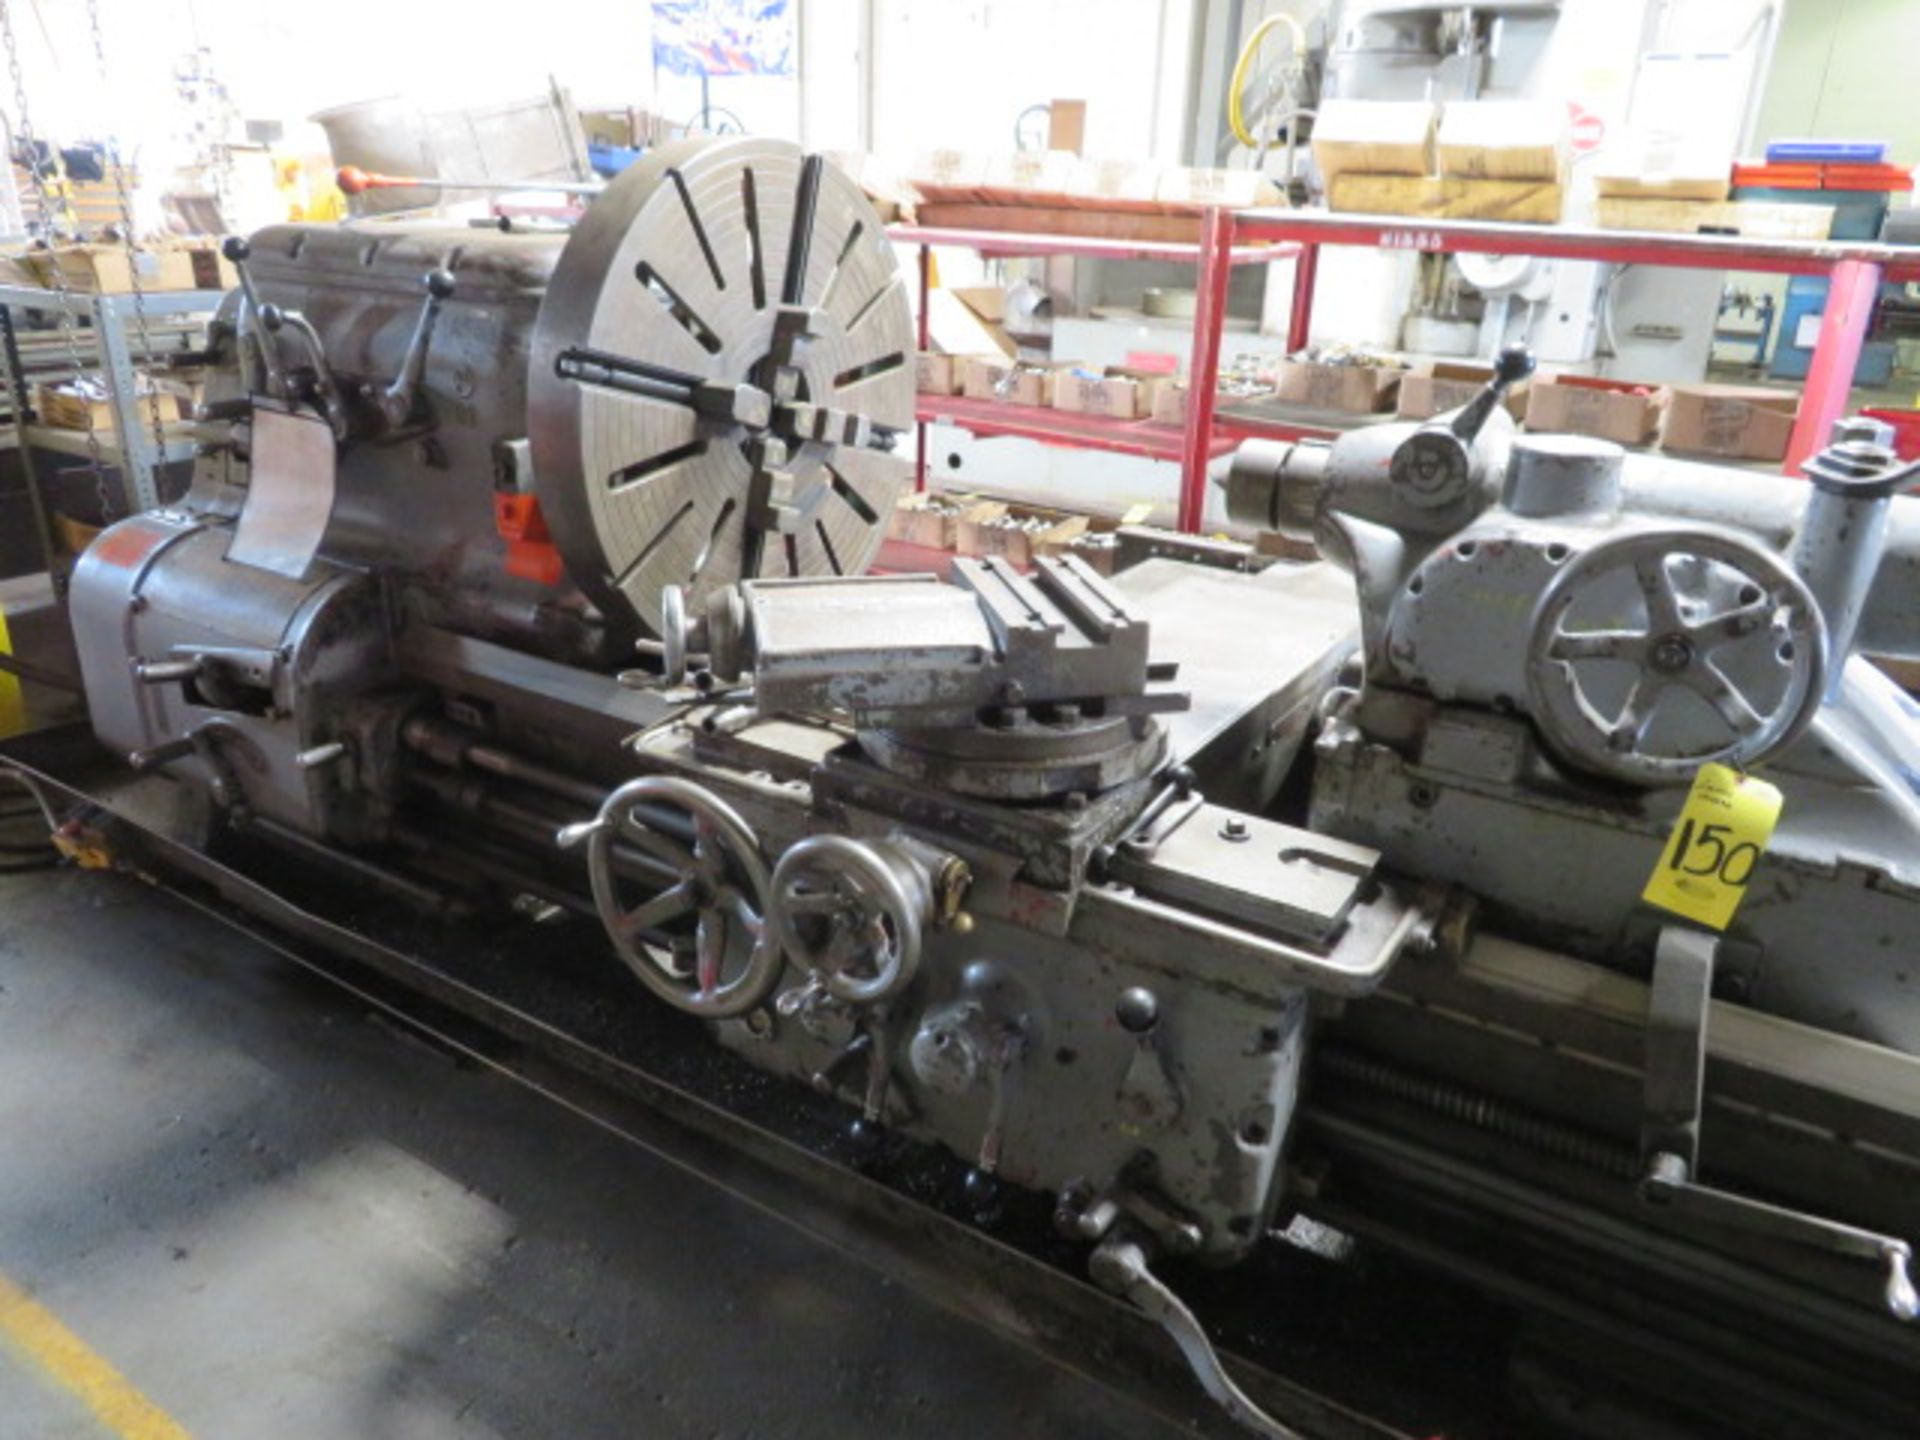 AXELSON 32 ENGINE LATHE , 40” x 154”, 24” & 36” 4-Jaw Chucks, 5-461 RPM, 36”, Face Plate - Image 2 of 3